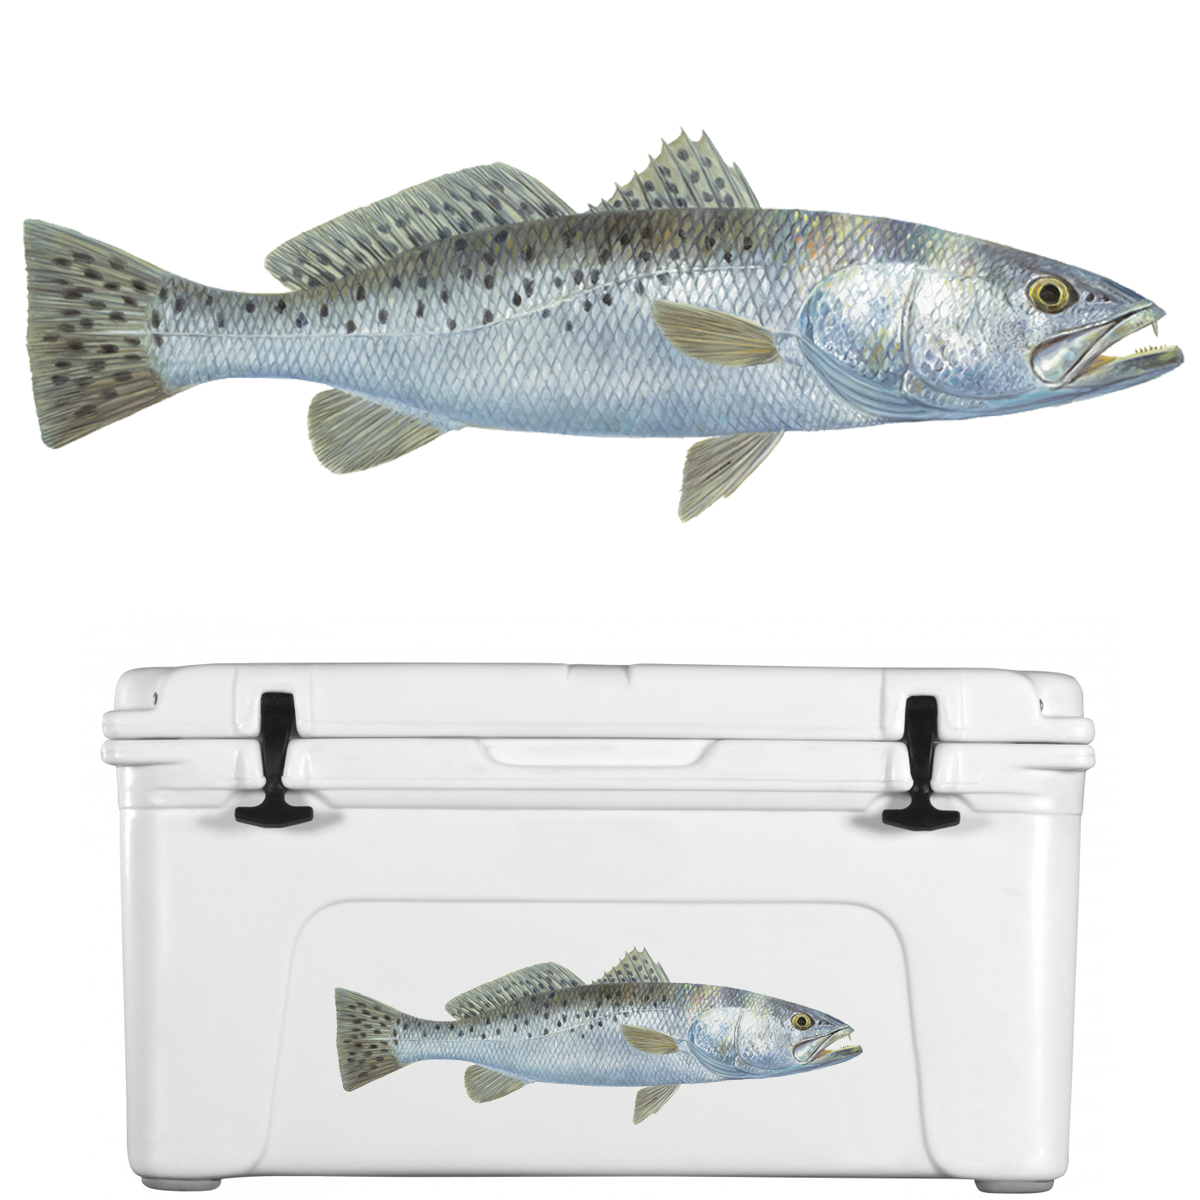 Trout Decal Speckled Lifelike - Skiff Life